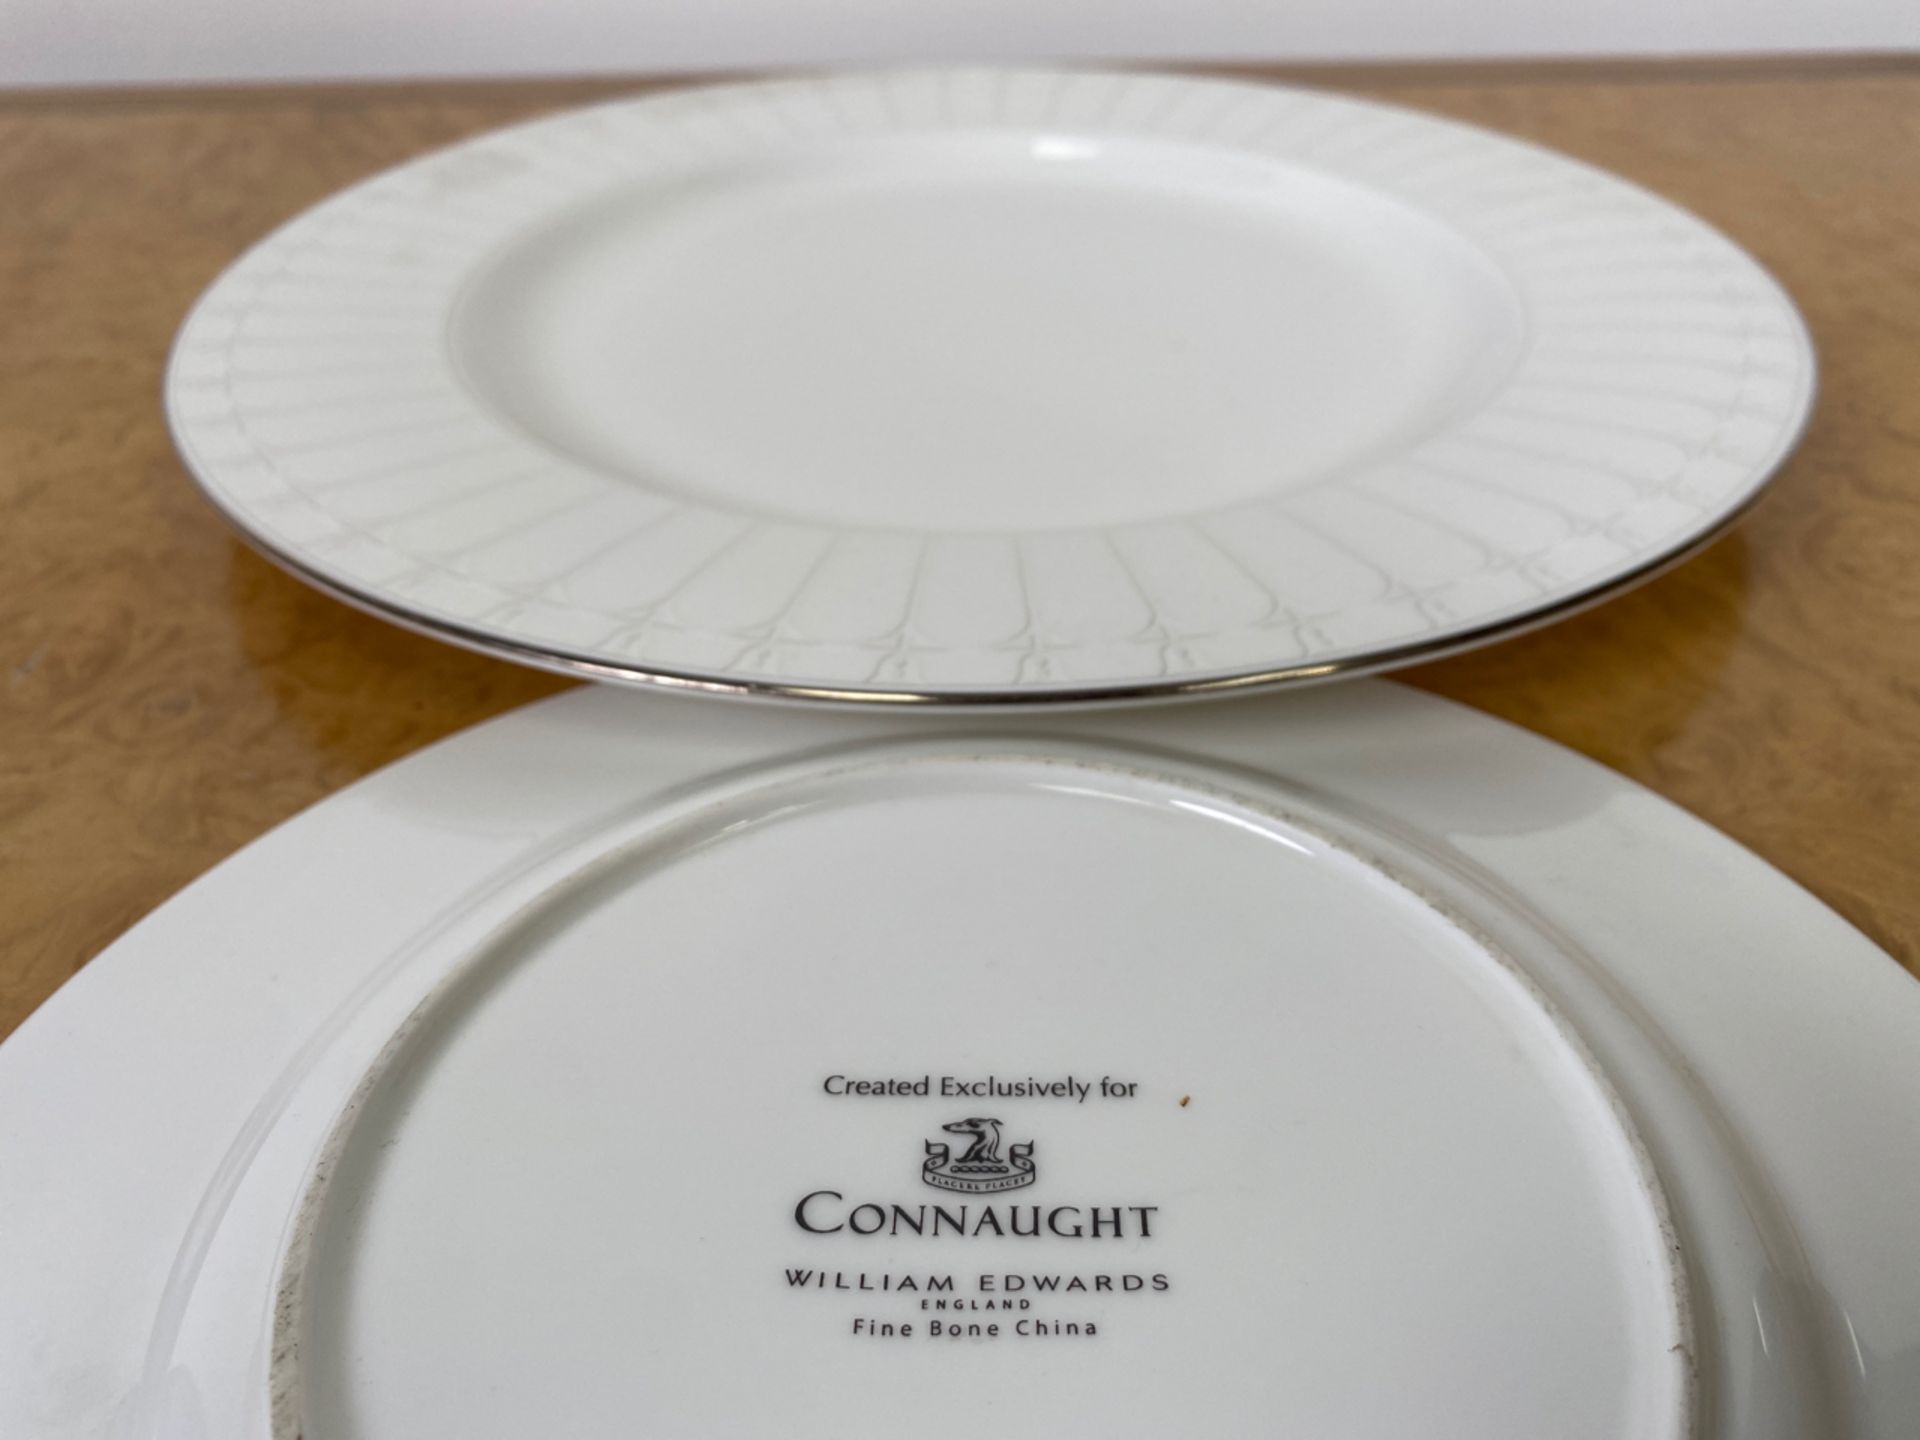 The Connaught Branded William Edwards Fine Bone China - Image 7 of 7